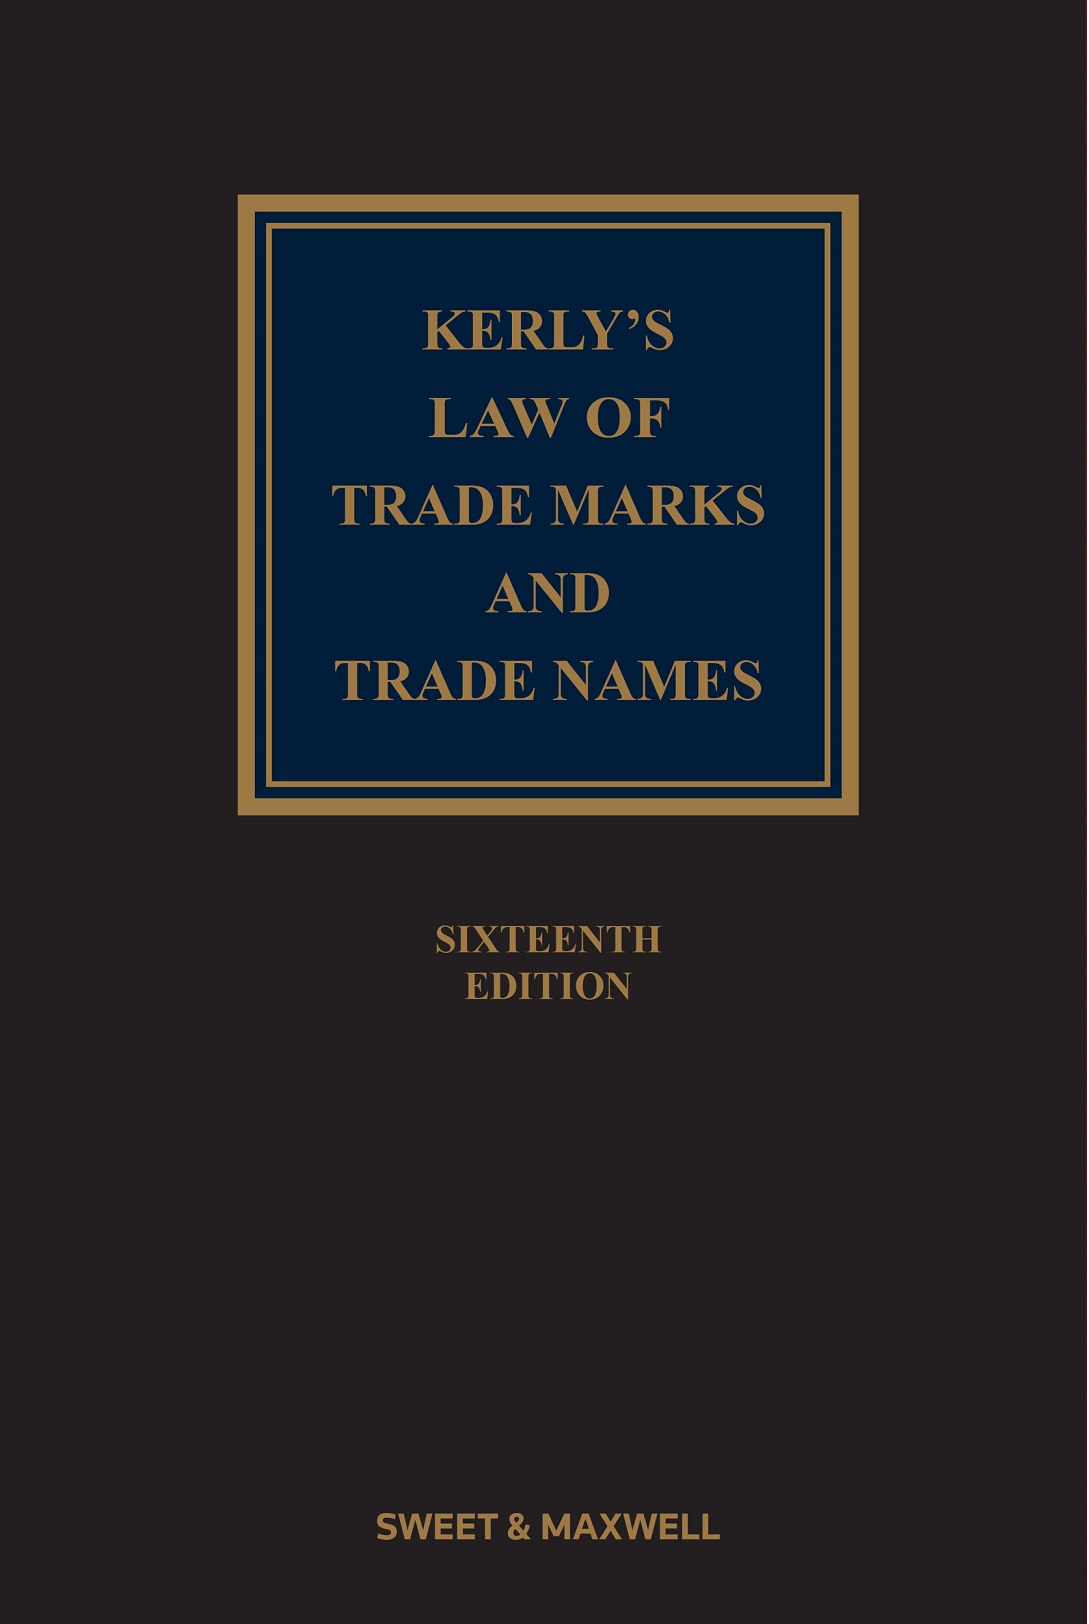 Kerly's Law of Trade Marks and Trade Names 17th Edition